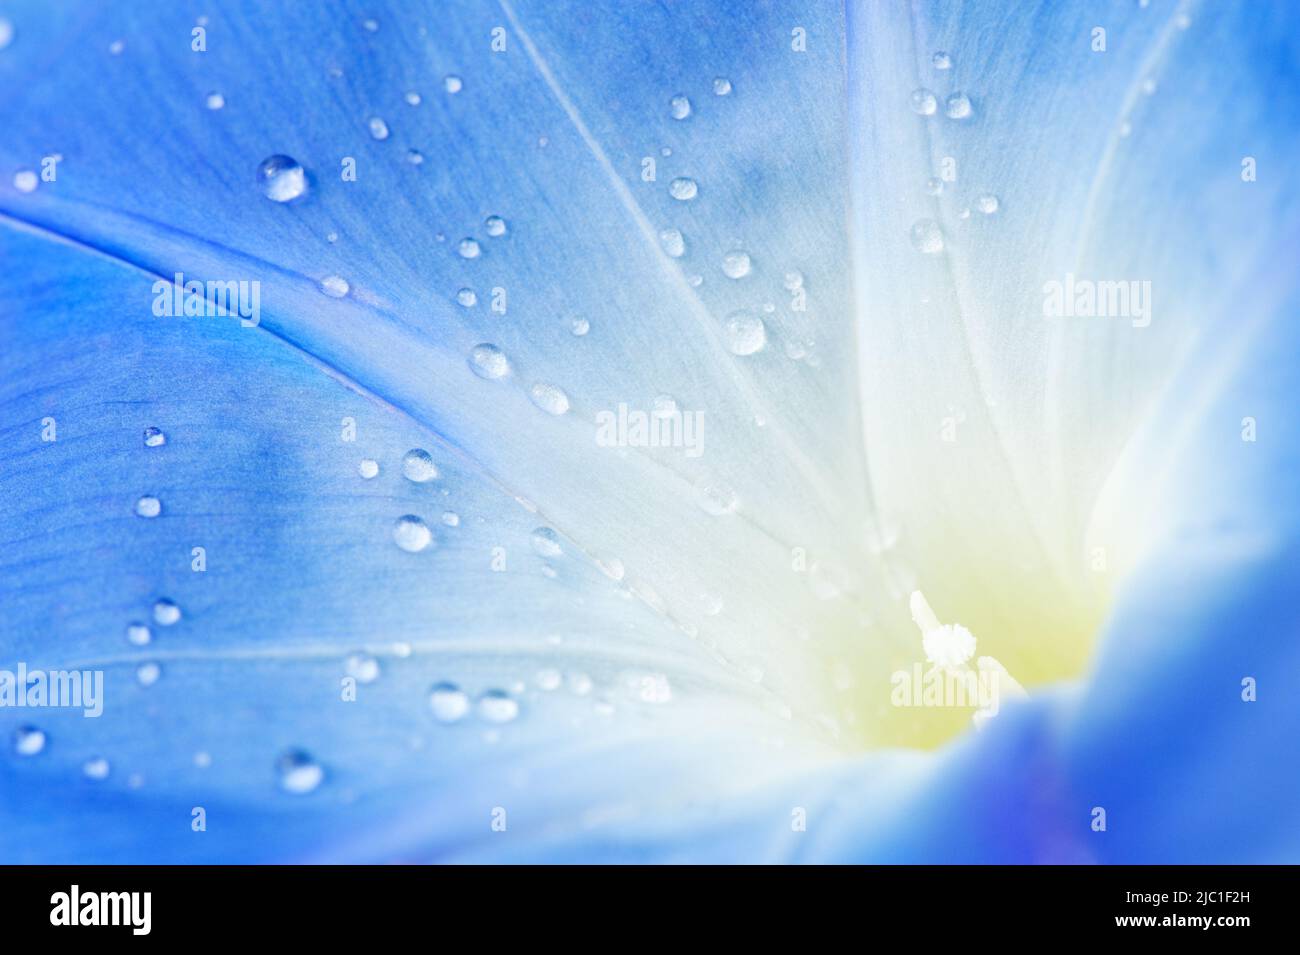 Raindrops on Morning Glory (Ipomoea tricolor) flower. Shallow DOF. Stock Photo